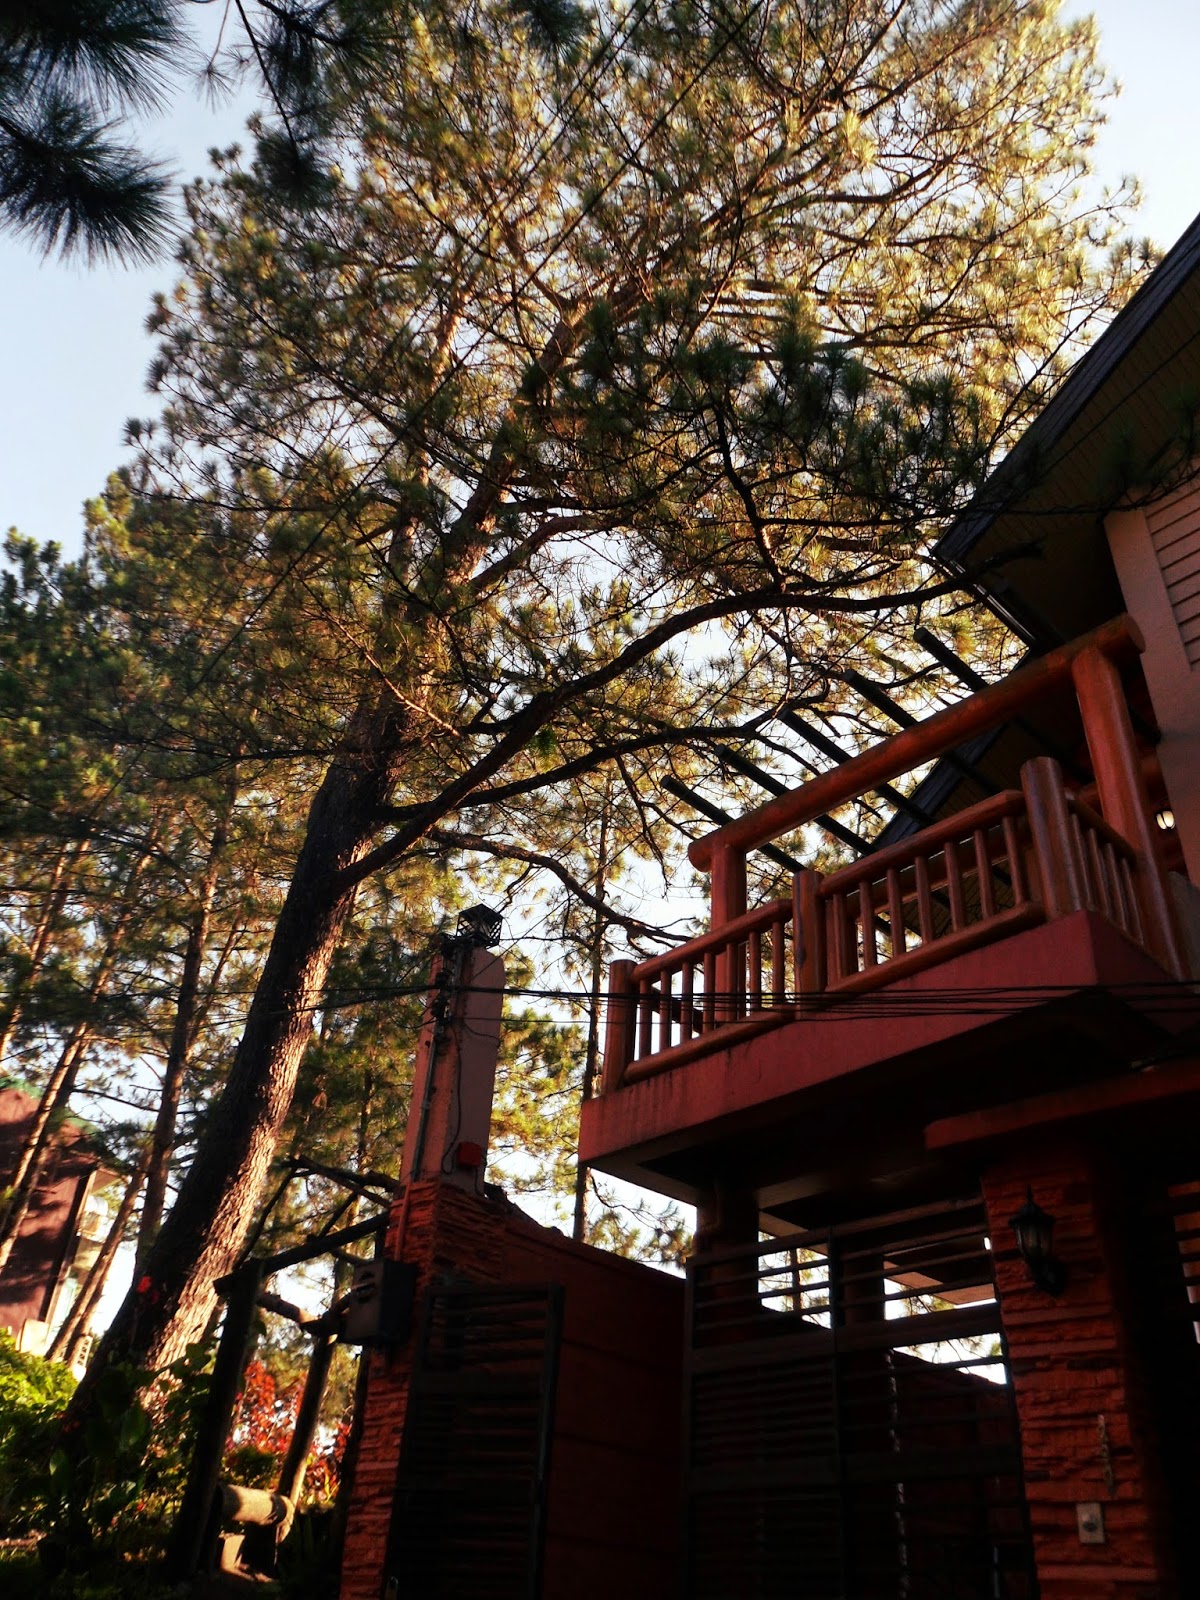 Baguio Pines Transient House